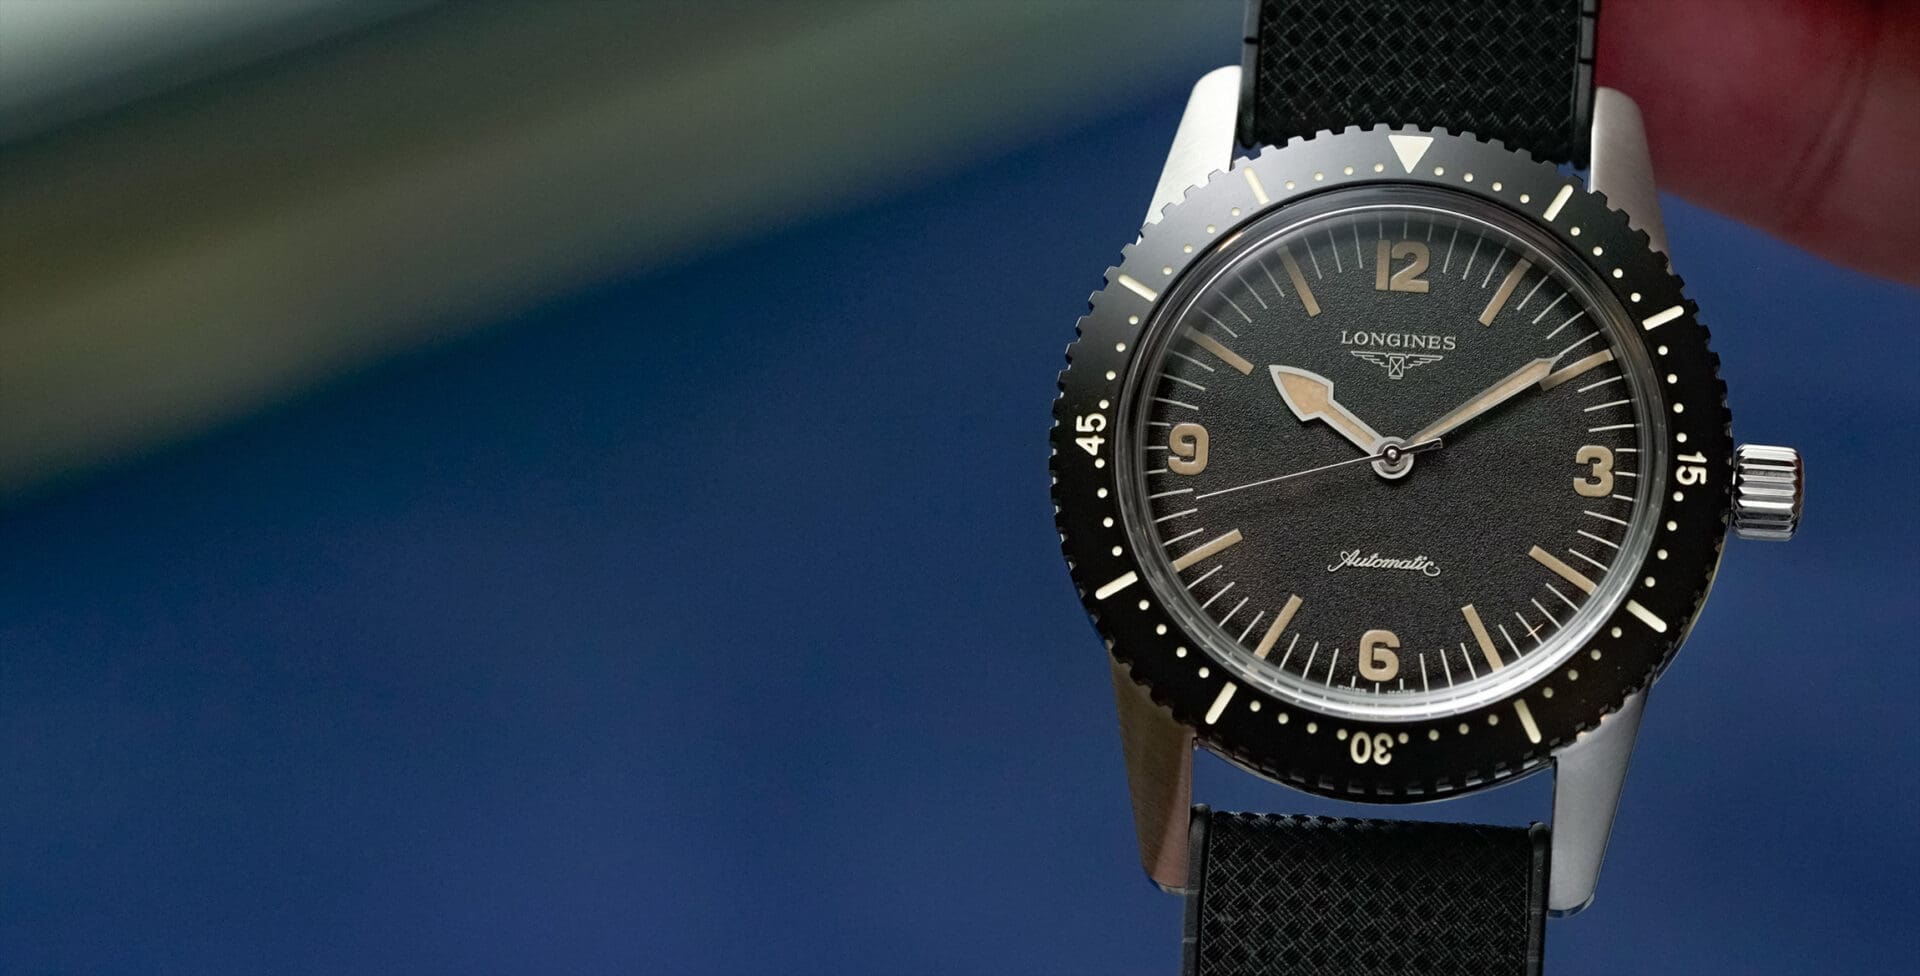 VIDEO: The Longines Skin Diver Watch - Time and Tide Watches